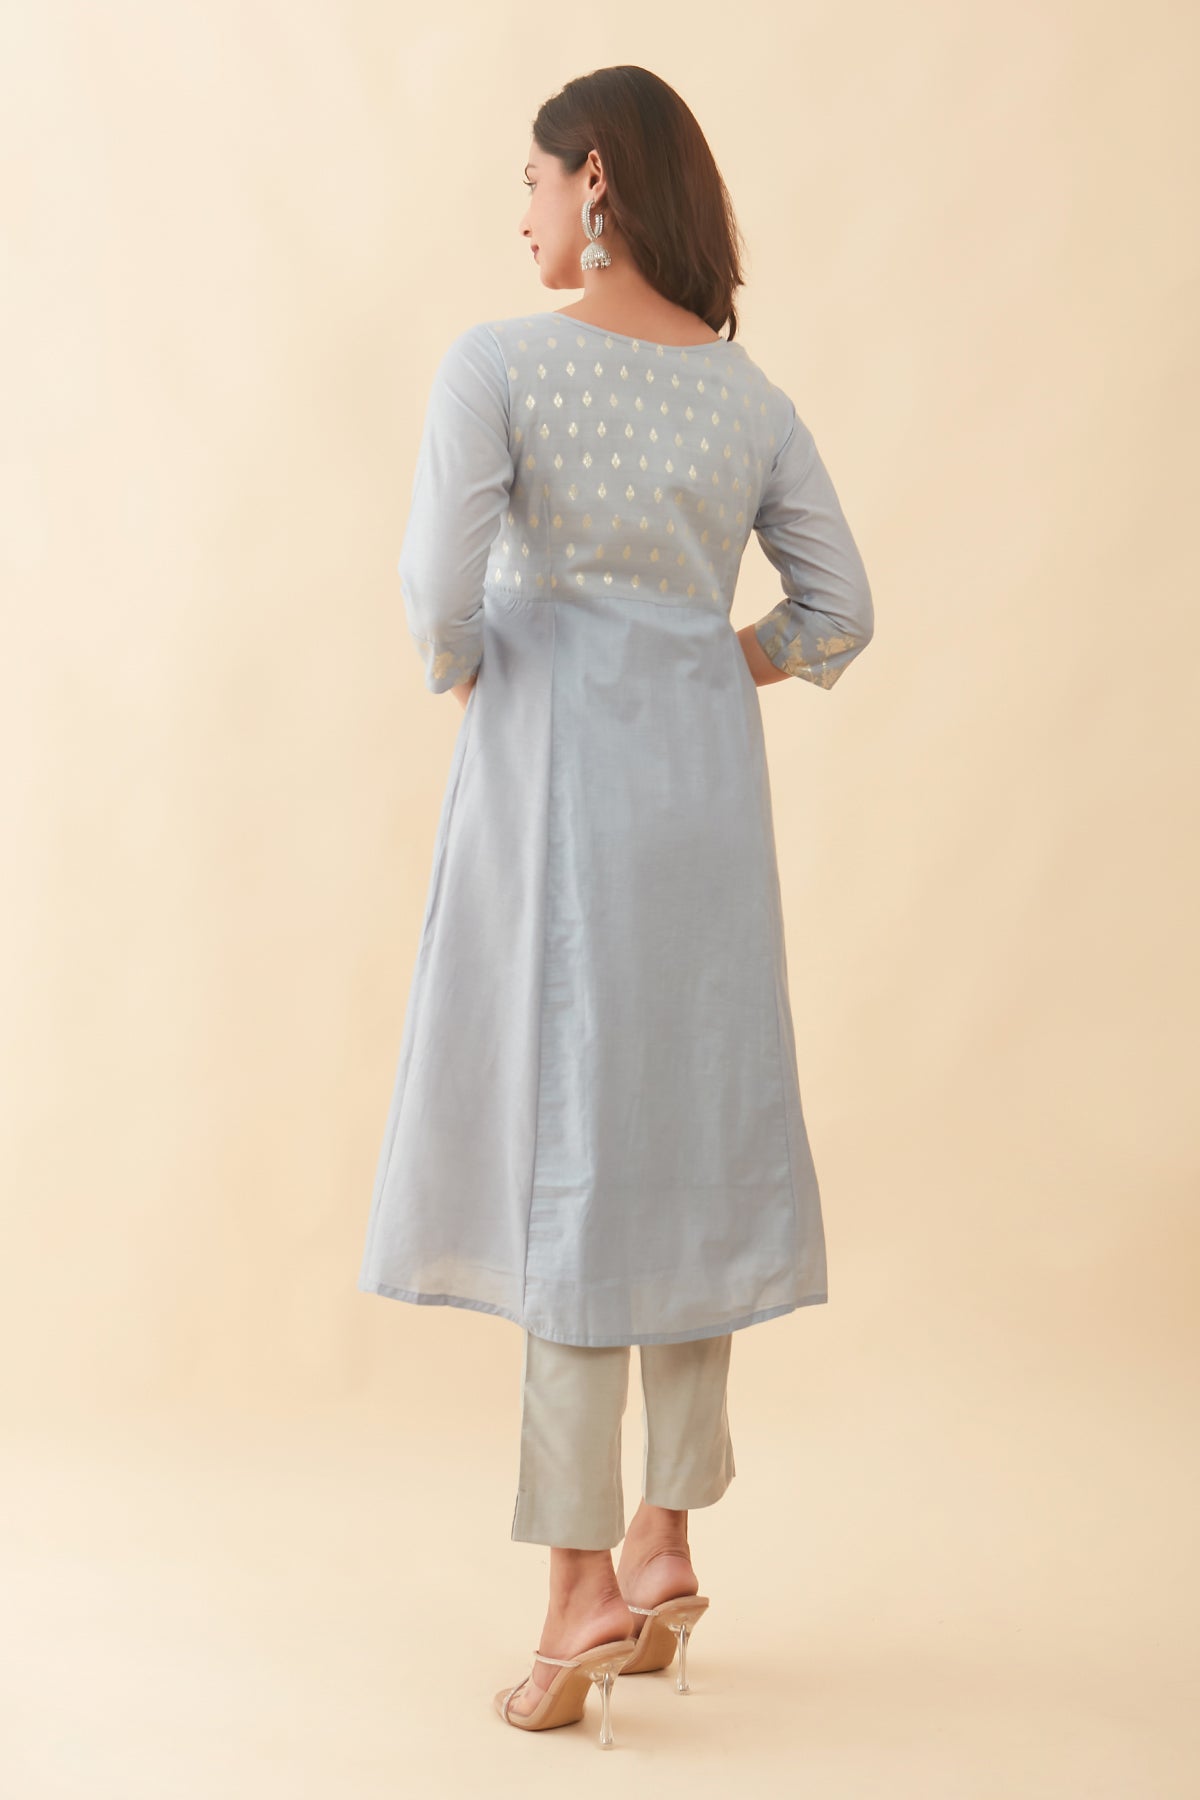 Floral Embroidered With Silver Brocade Panelled Kurta - Blue